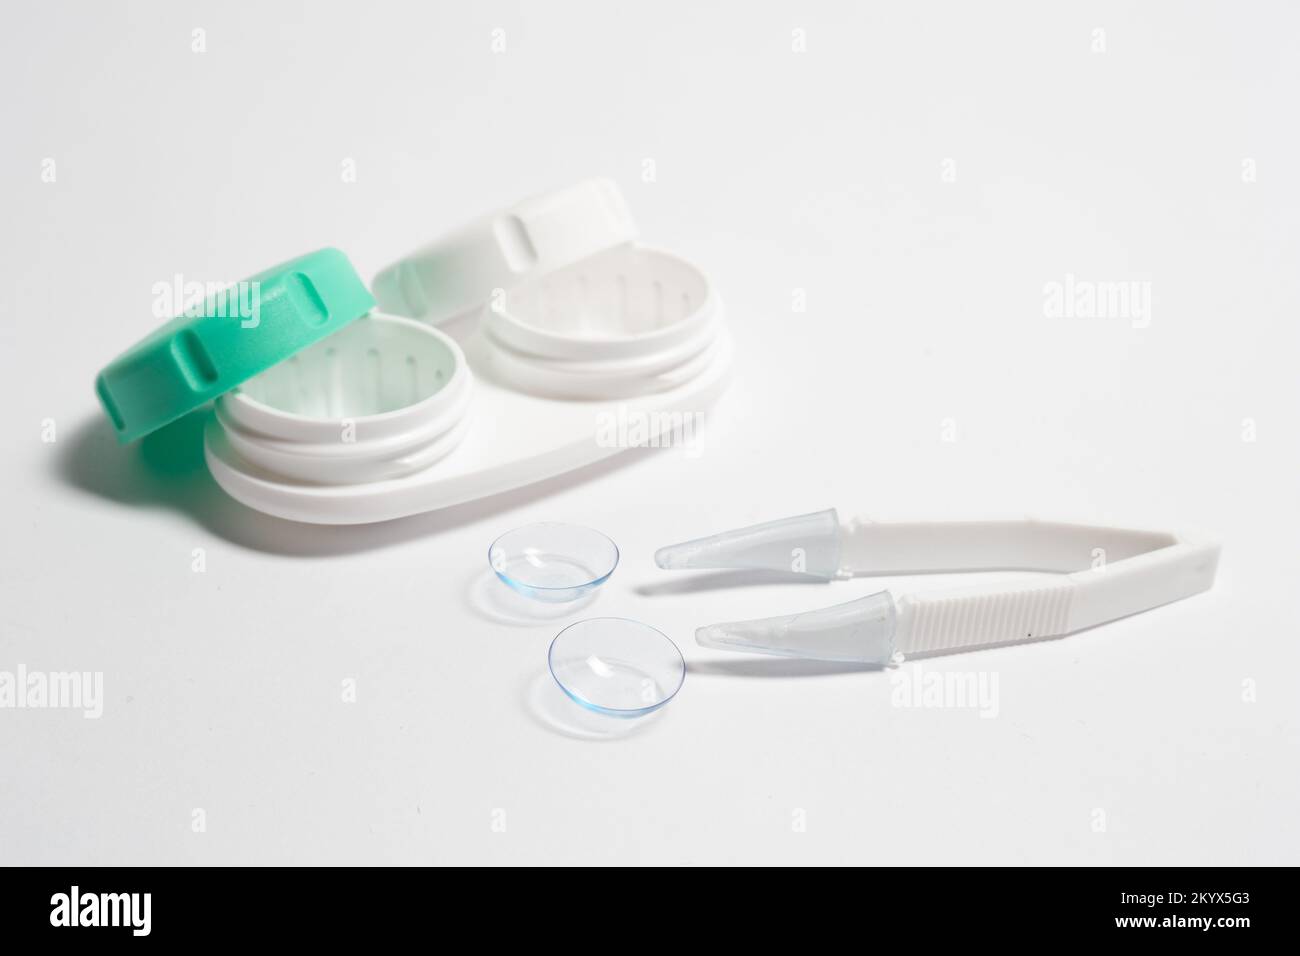 Contact lenses, tweezers and lens storage container on the table. Stock Photo